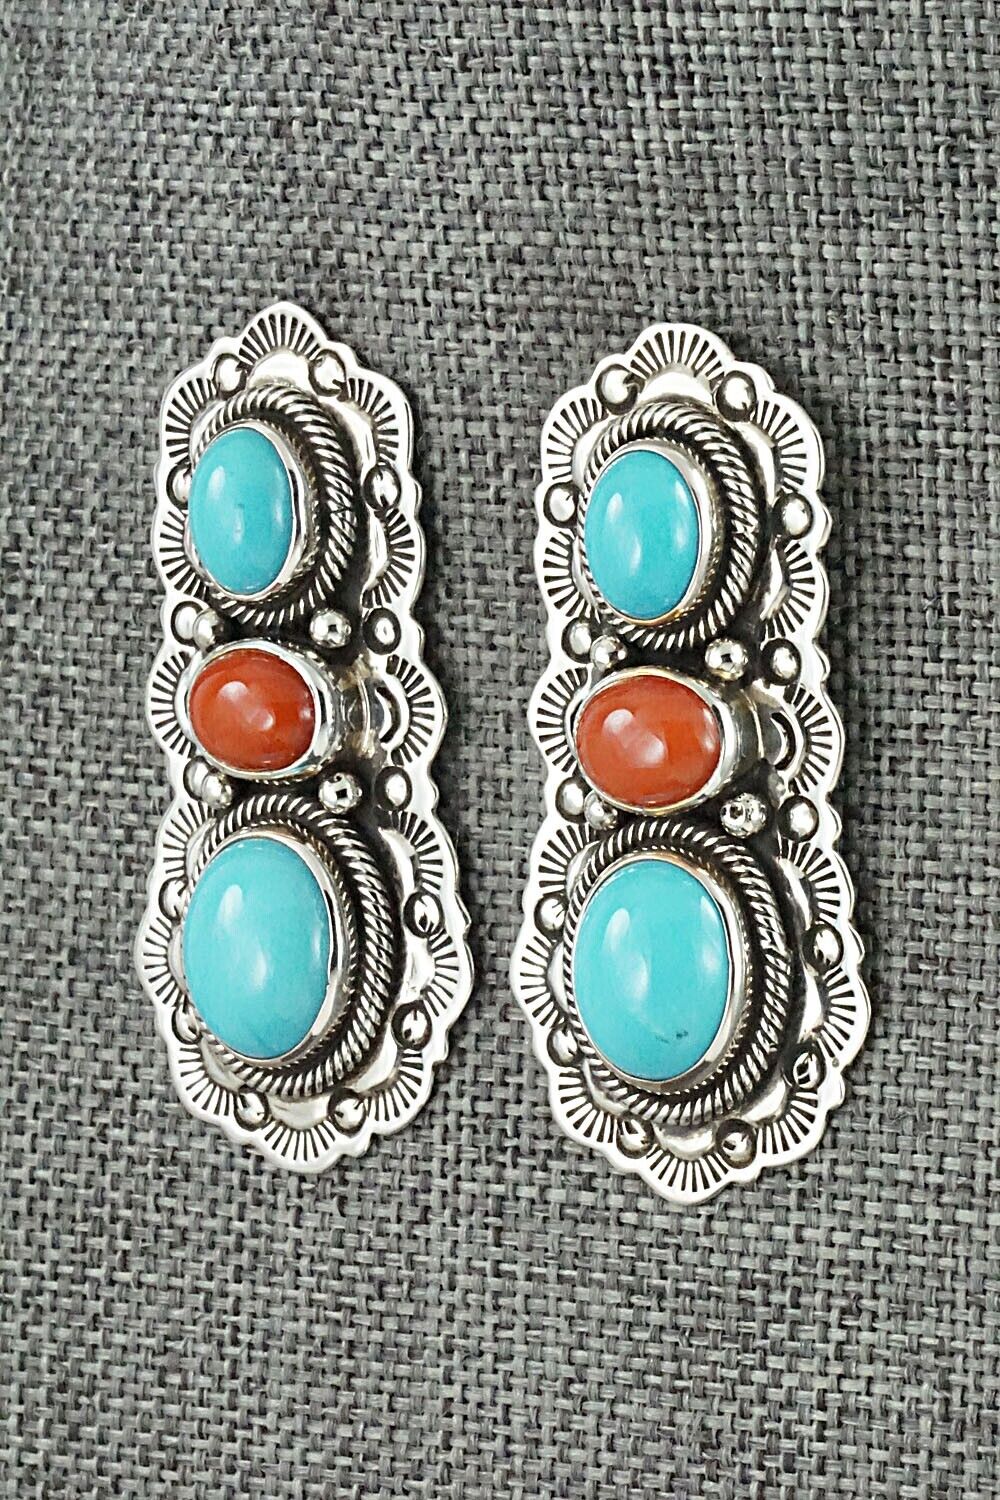 Turquoise, Coral & Sterling Silver Earrings - Bernyse Chavez